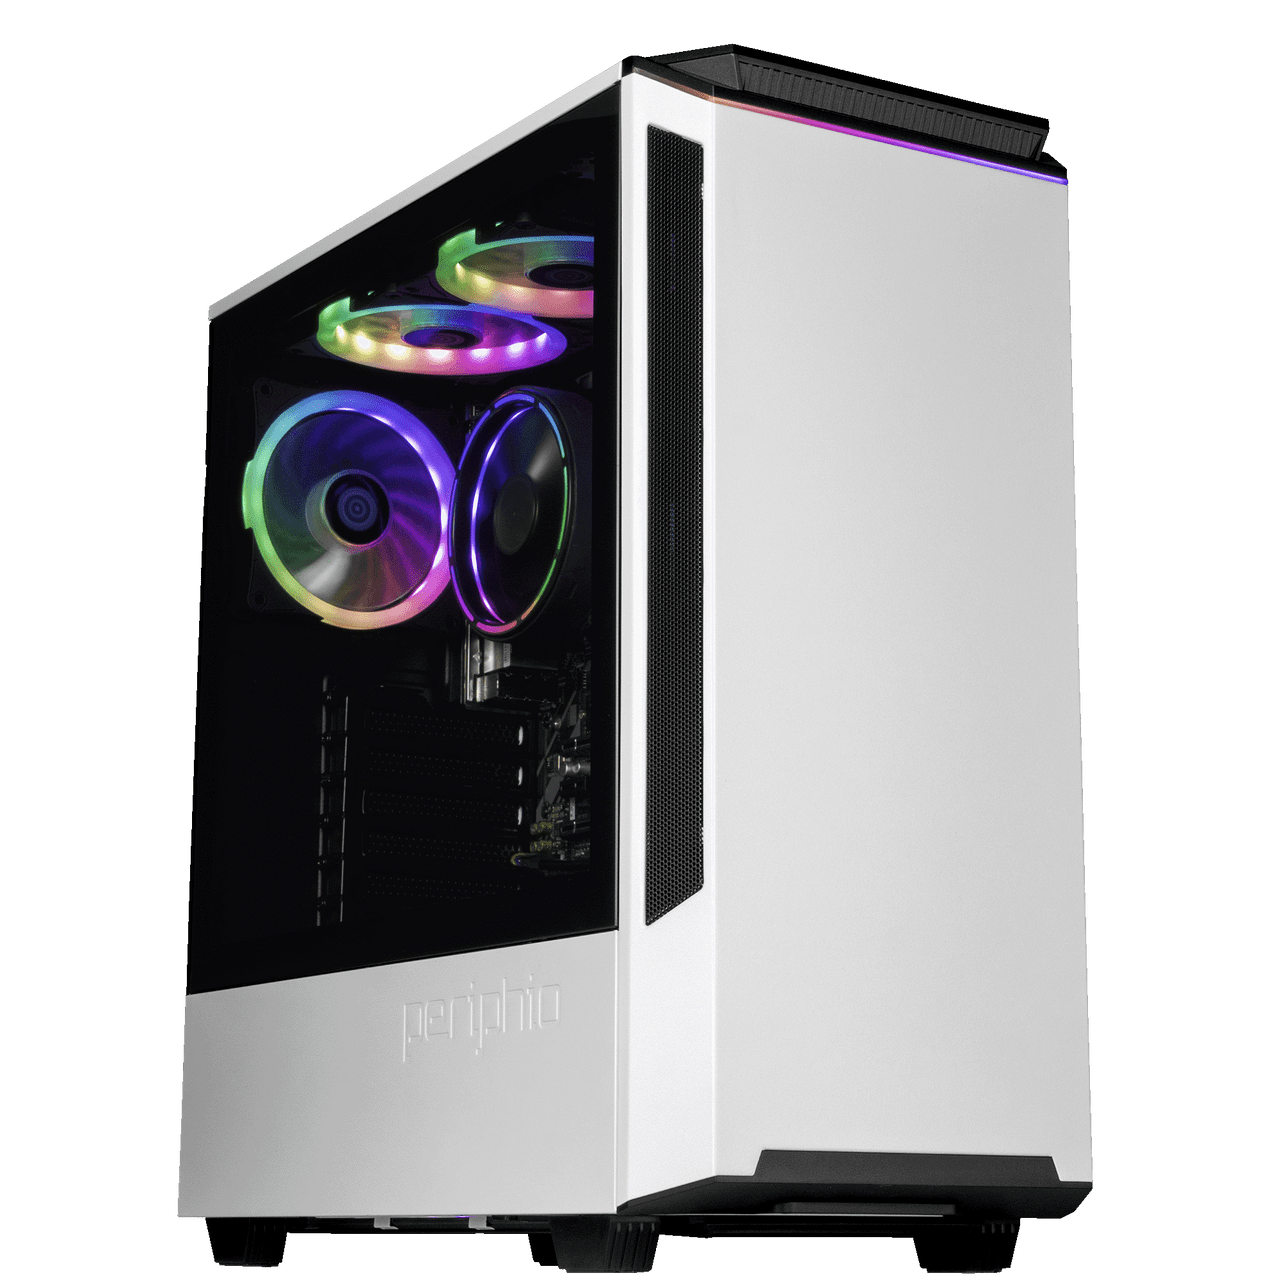 Is this a good pc? It's £850 : r/GamingPCBuildHelp